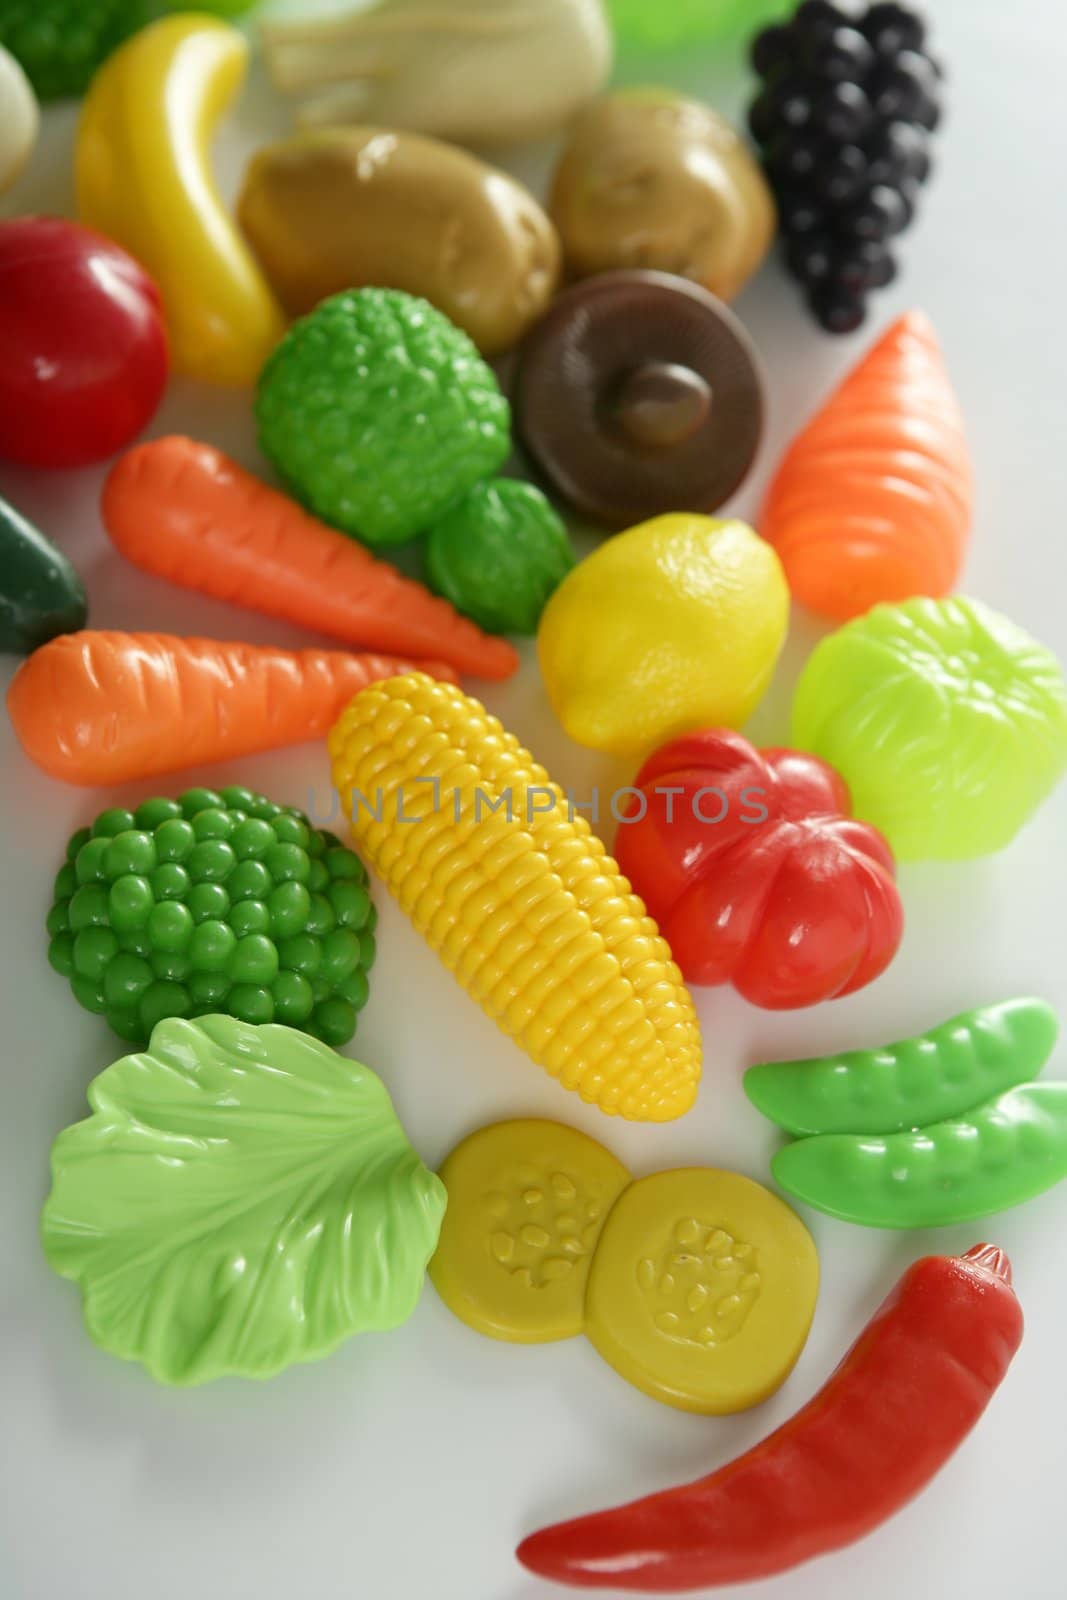 Plastic game, fake varied vegetables and fruits by lunamarina